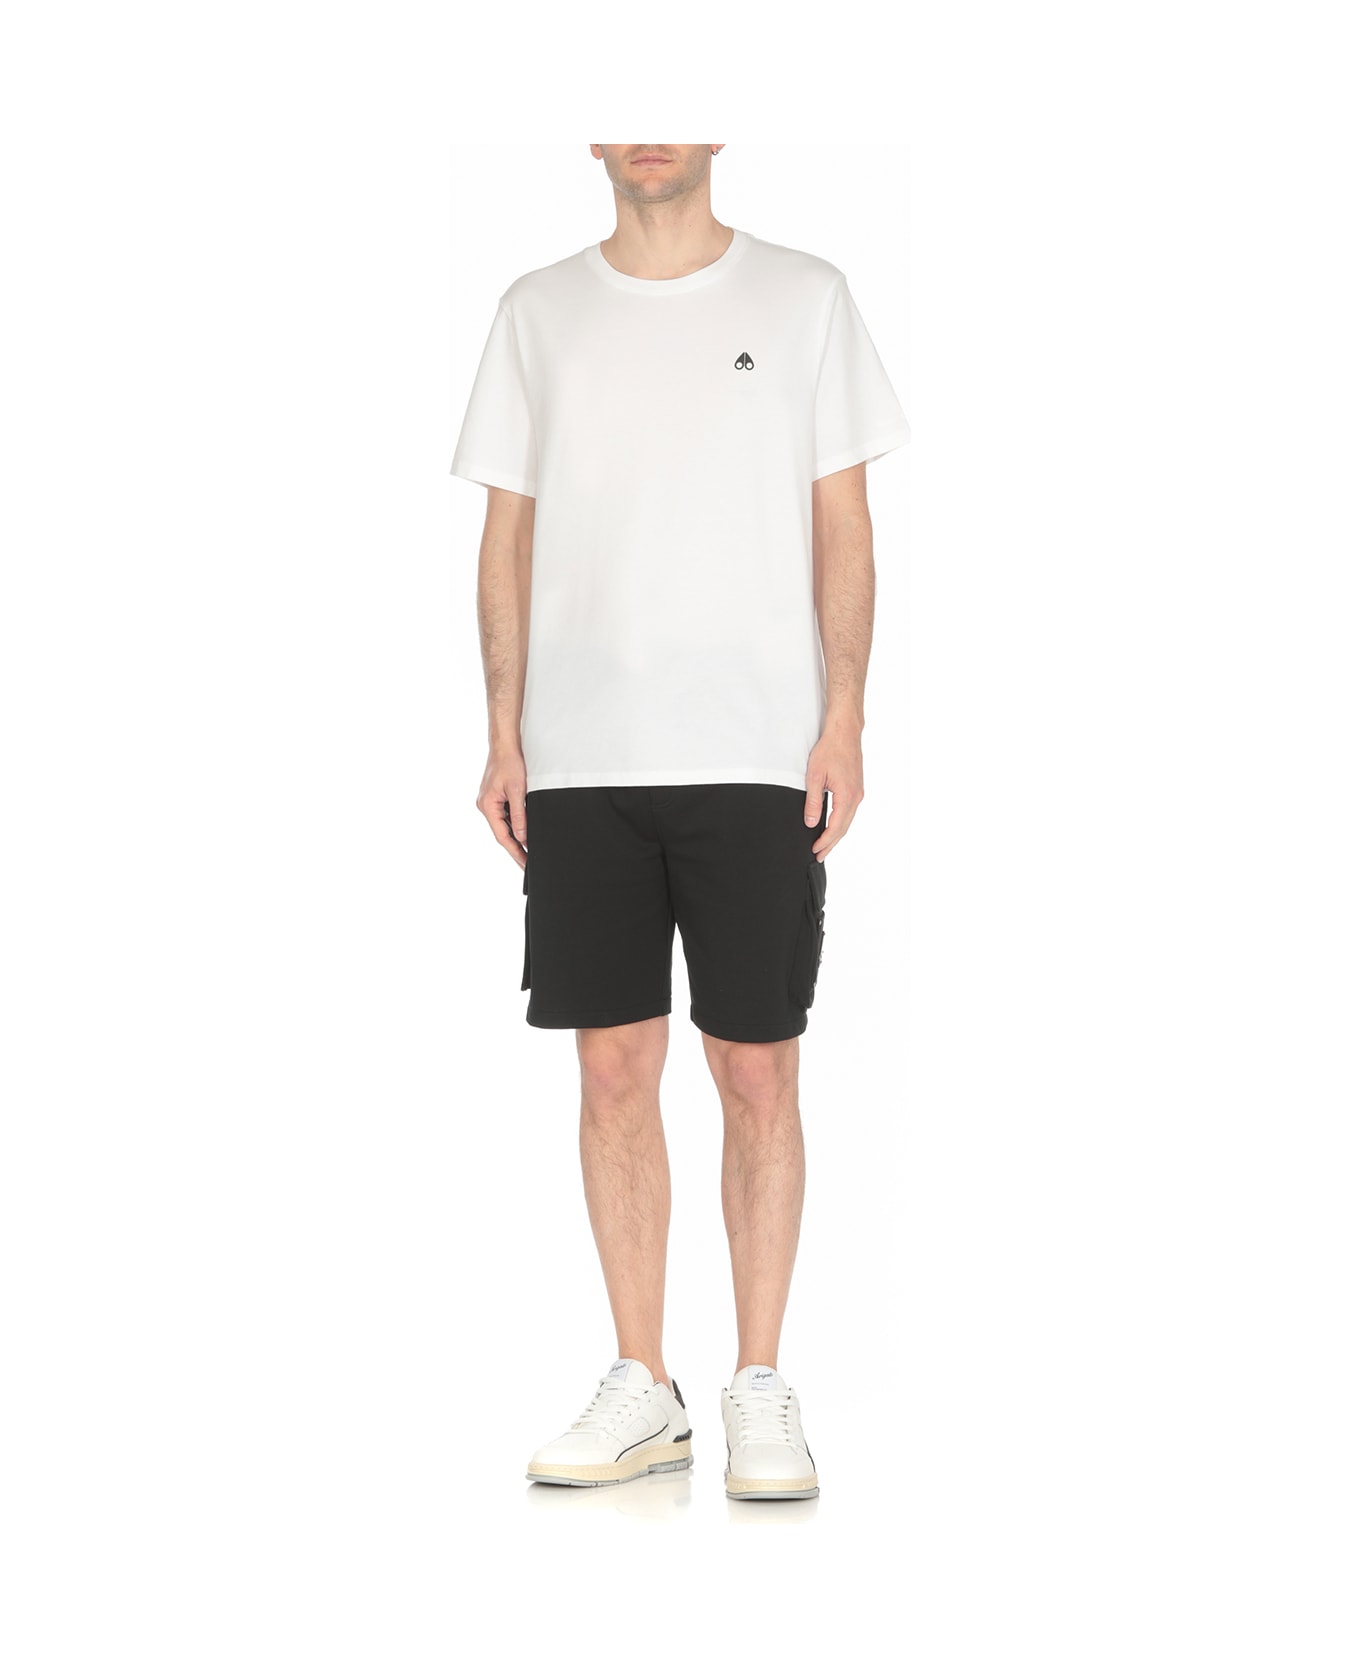 Moose Knuckles Logoed T-shirt - White